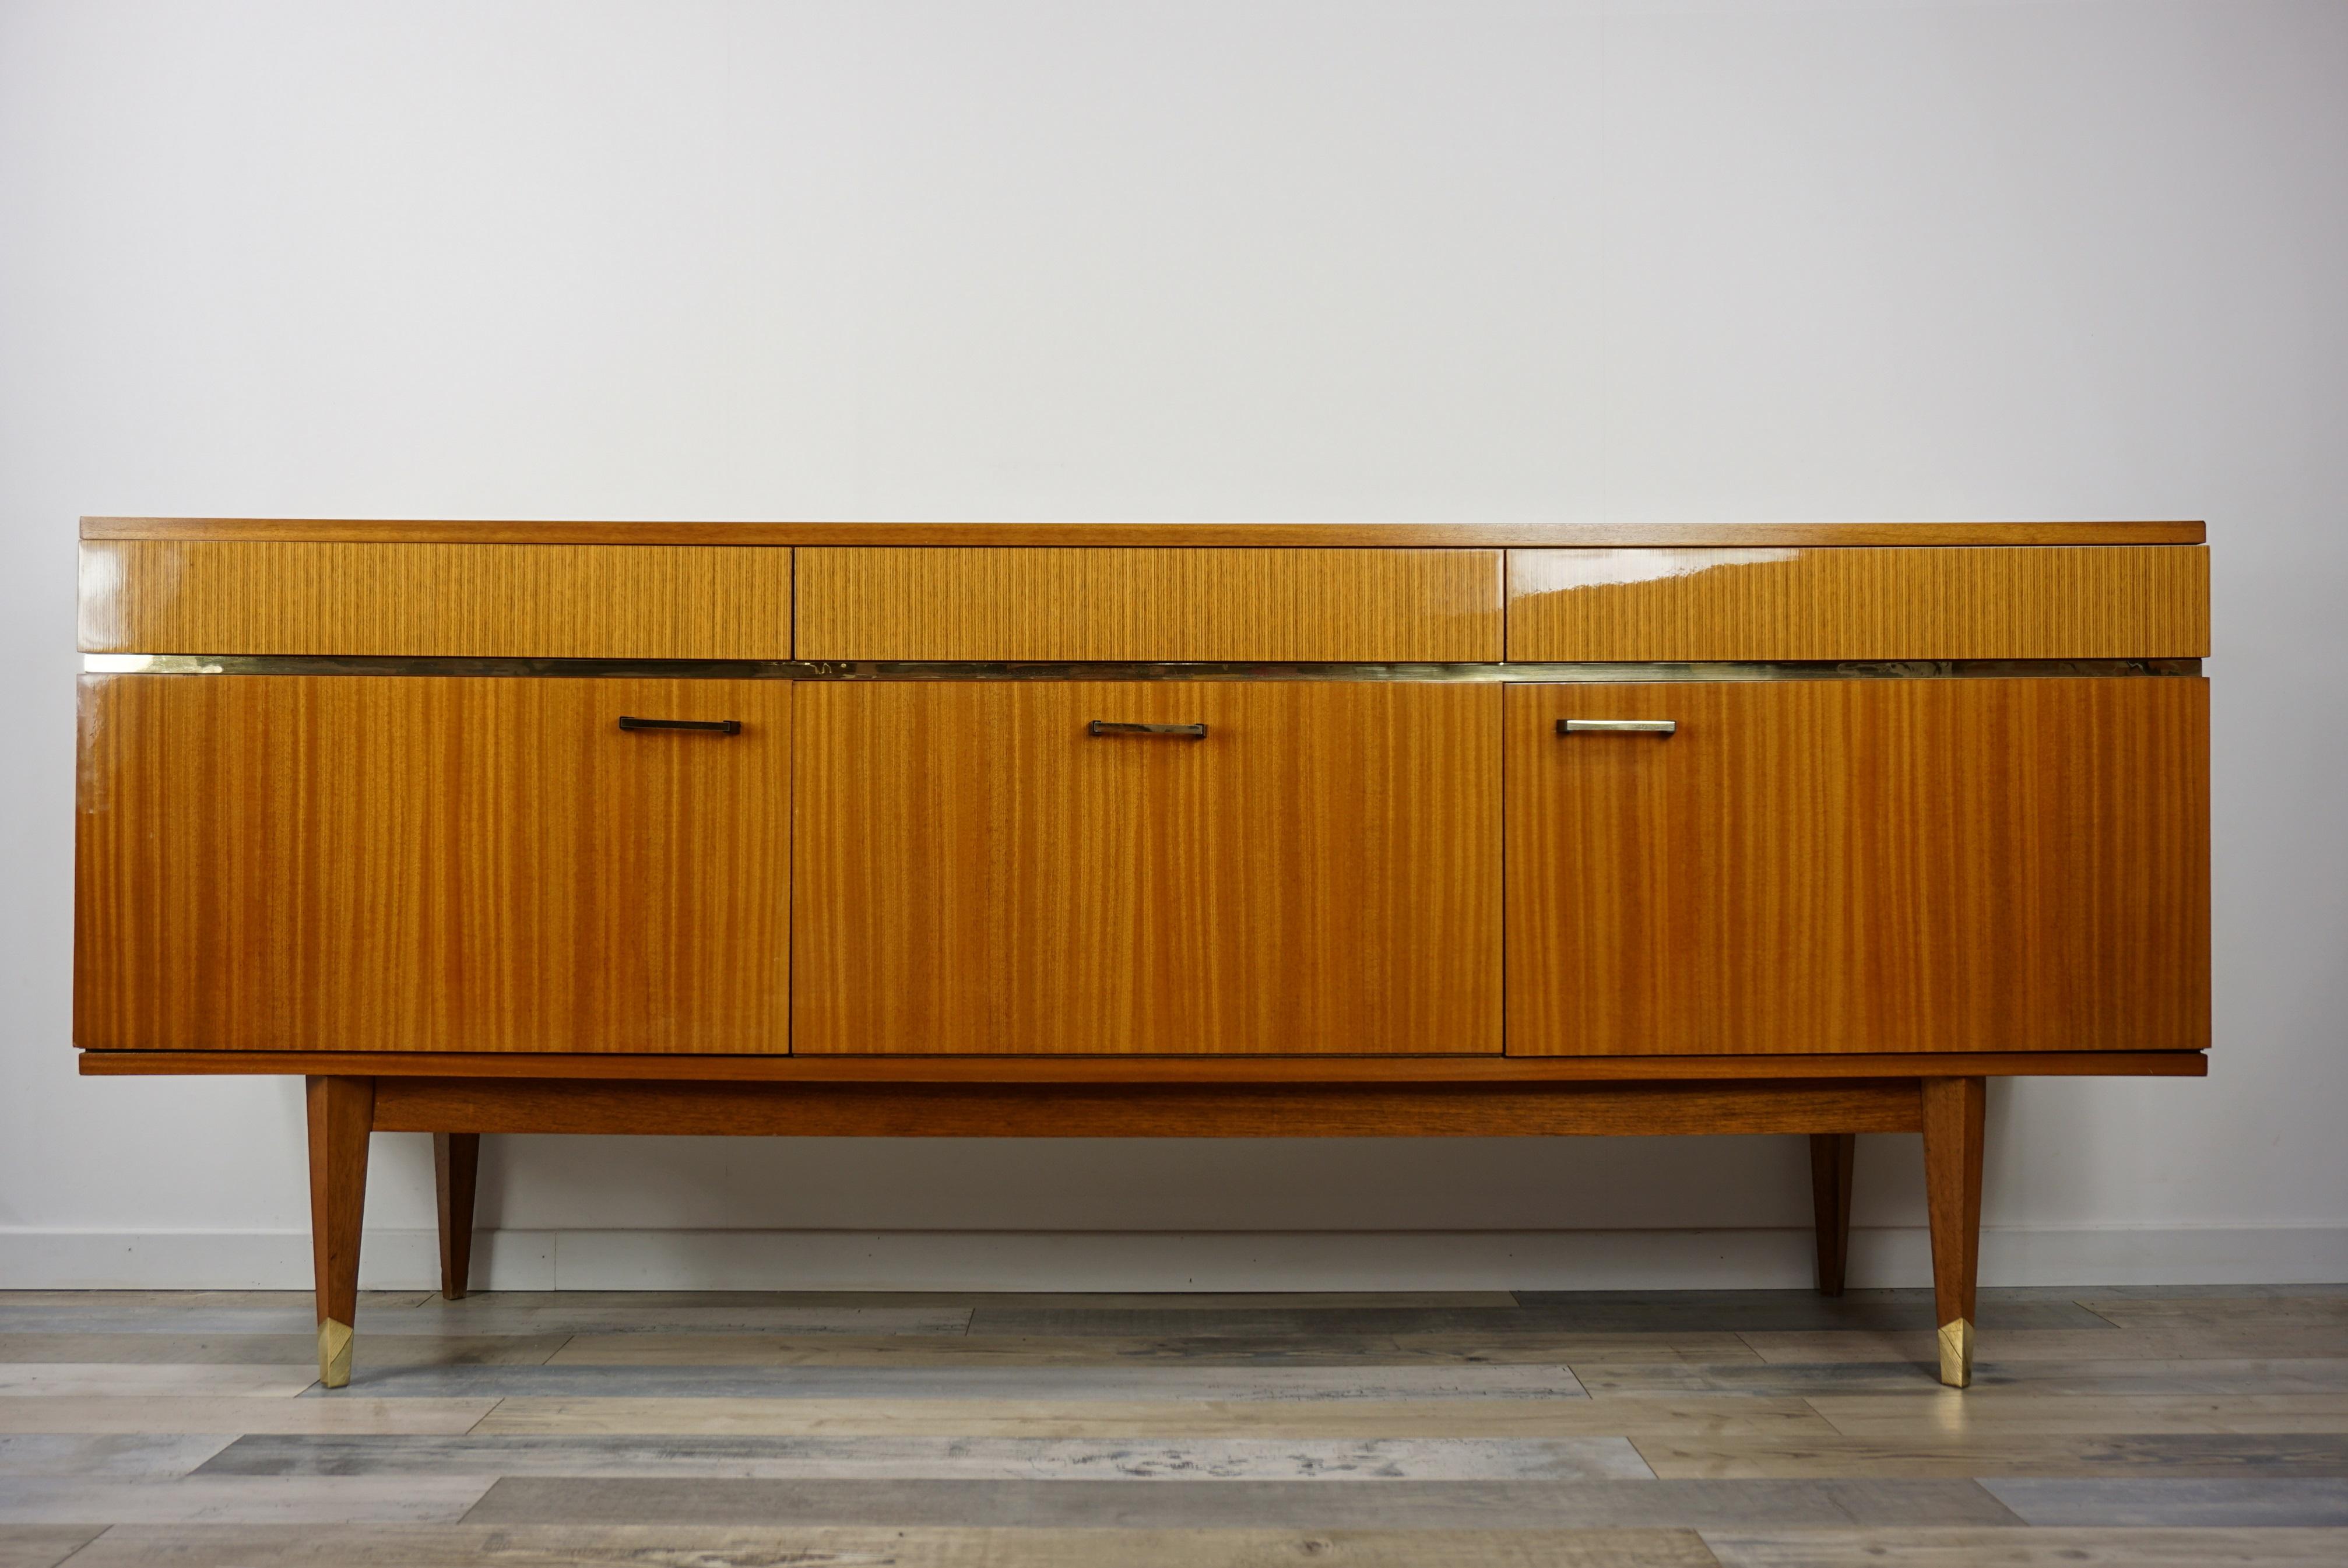 1950s French design wooden and glossy sideboard with pure and harmonious lines. Composed of a wooden structure, compass feet with brass finish, 3 drawers (invisible sculpted handles) and 3 closed storage spaces; shelves on each side and a dry bar